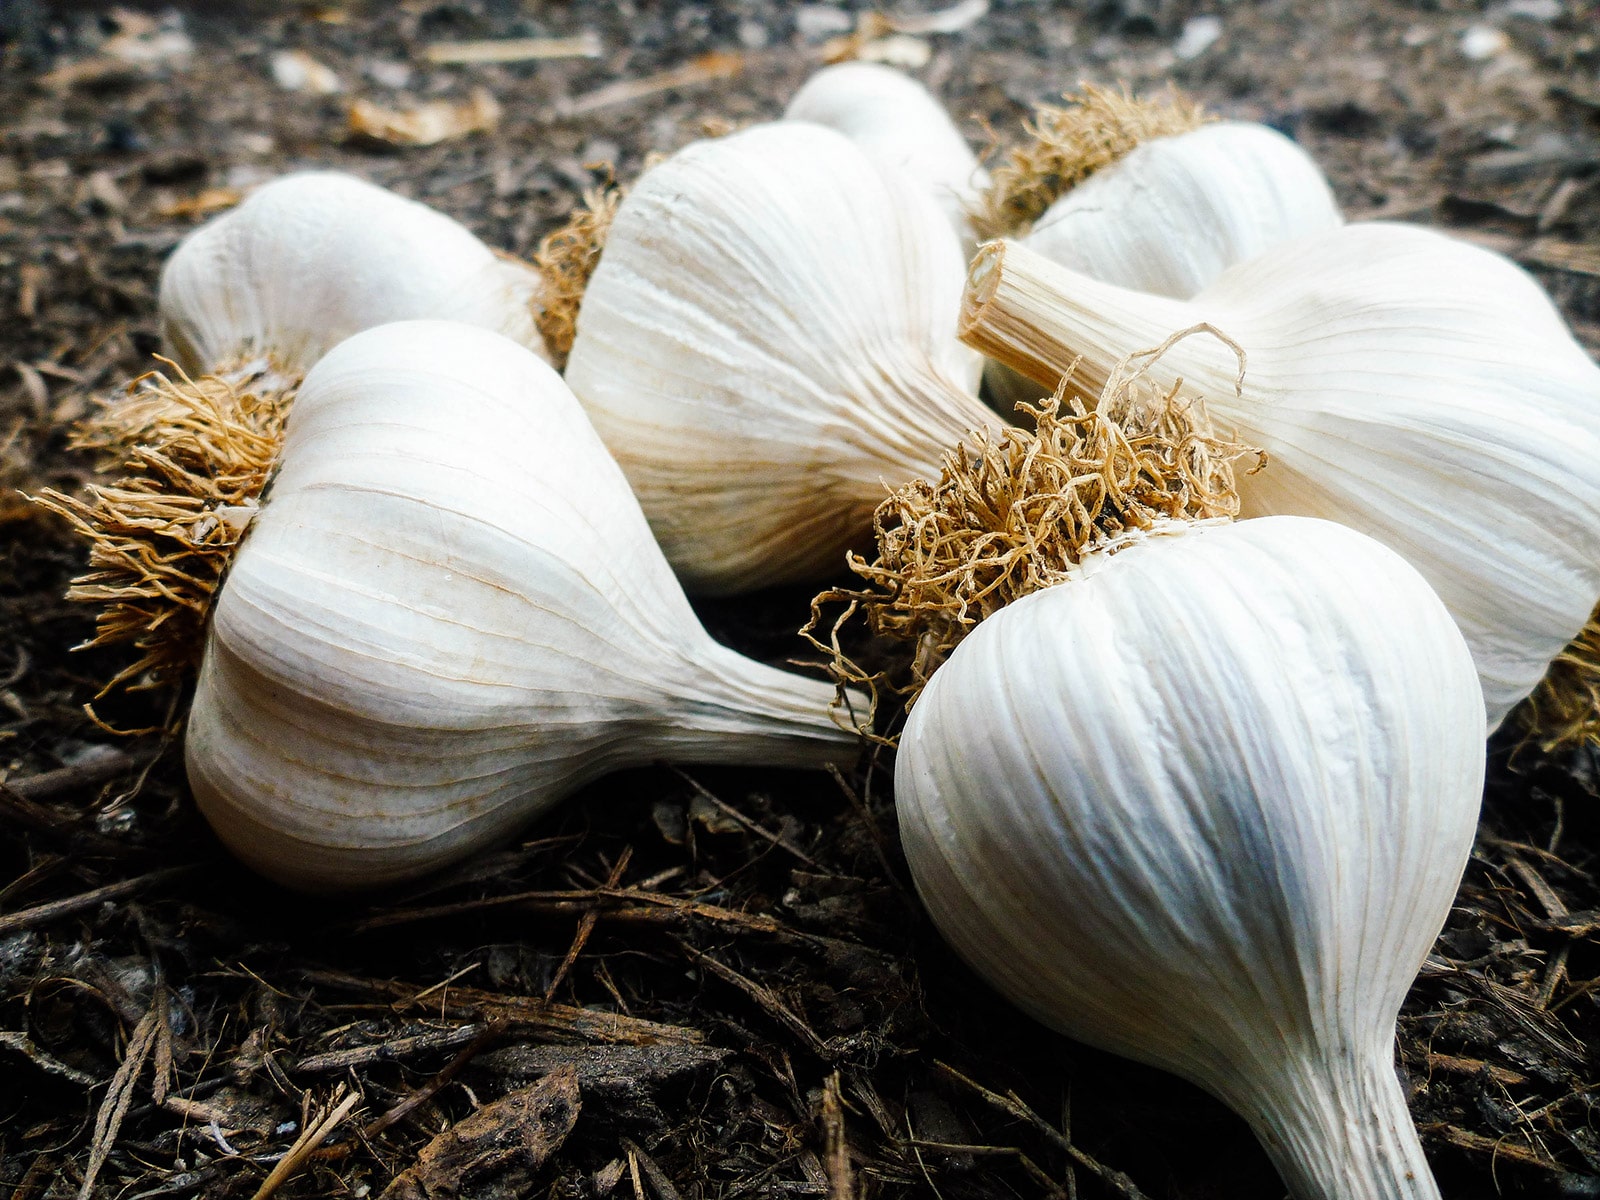 Homegrown garlic bulbs that can be used as seed garlic for next season